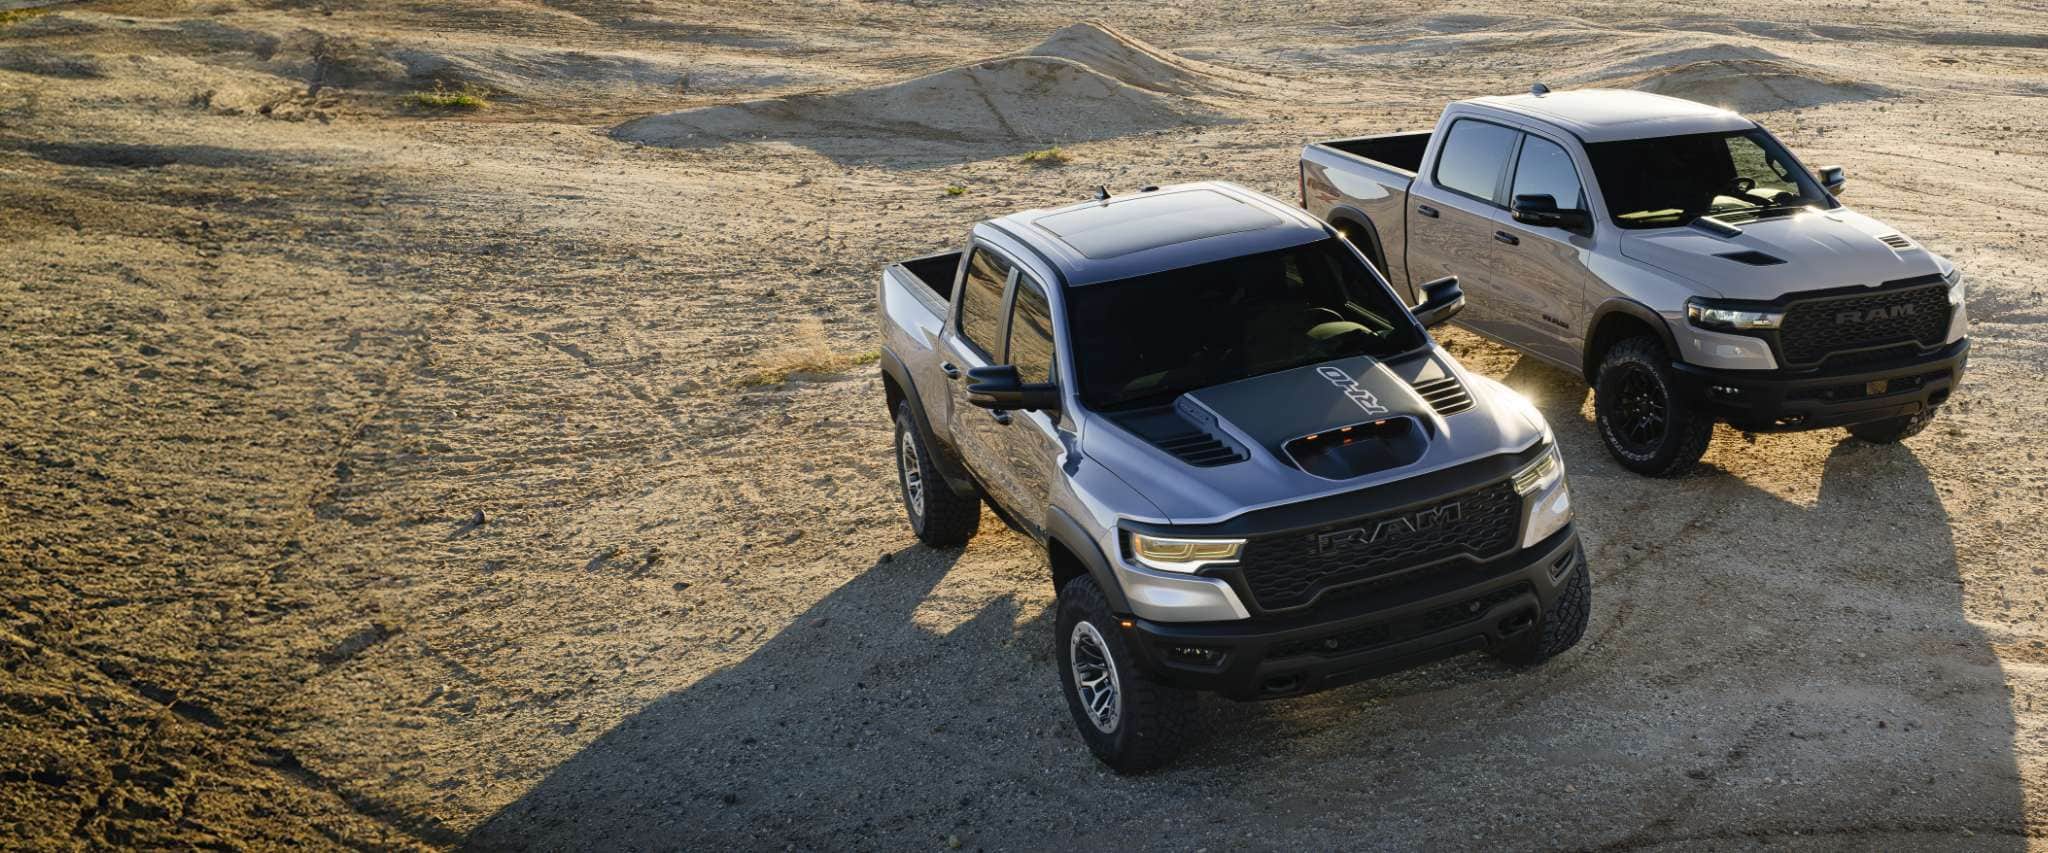 Two Ram Brand Off-Road Trucks parked off-road in the desert: on the left, a silver 2025 Ram 1500 RHO Crew Cab and on the right a silver 2025 Ram 1500 Rebel X Crew Cab.